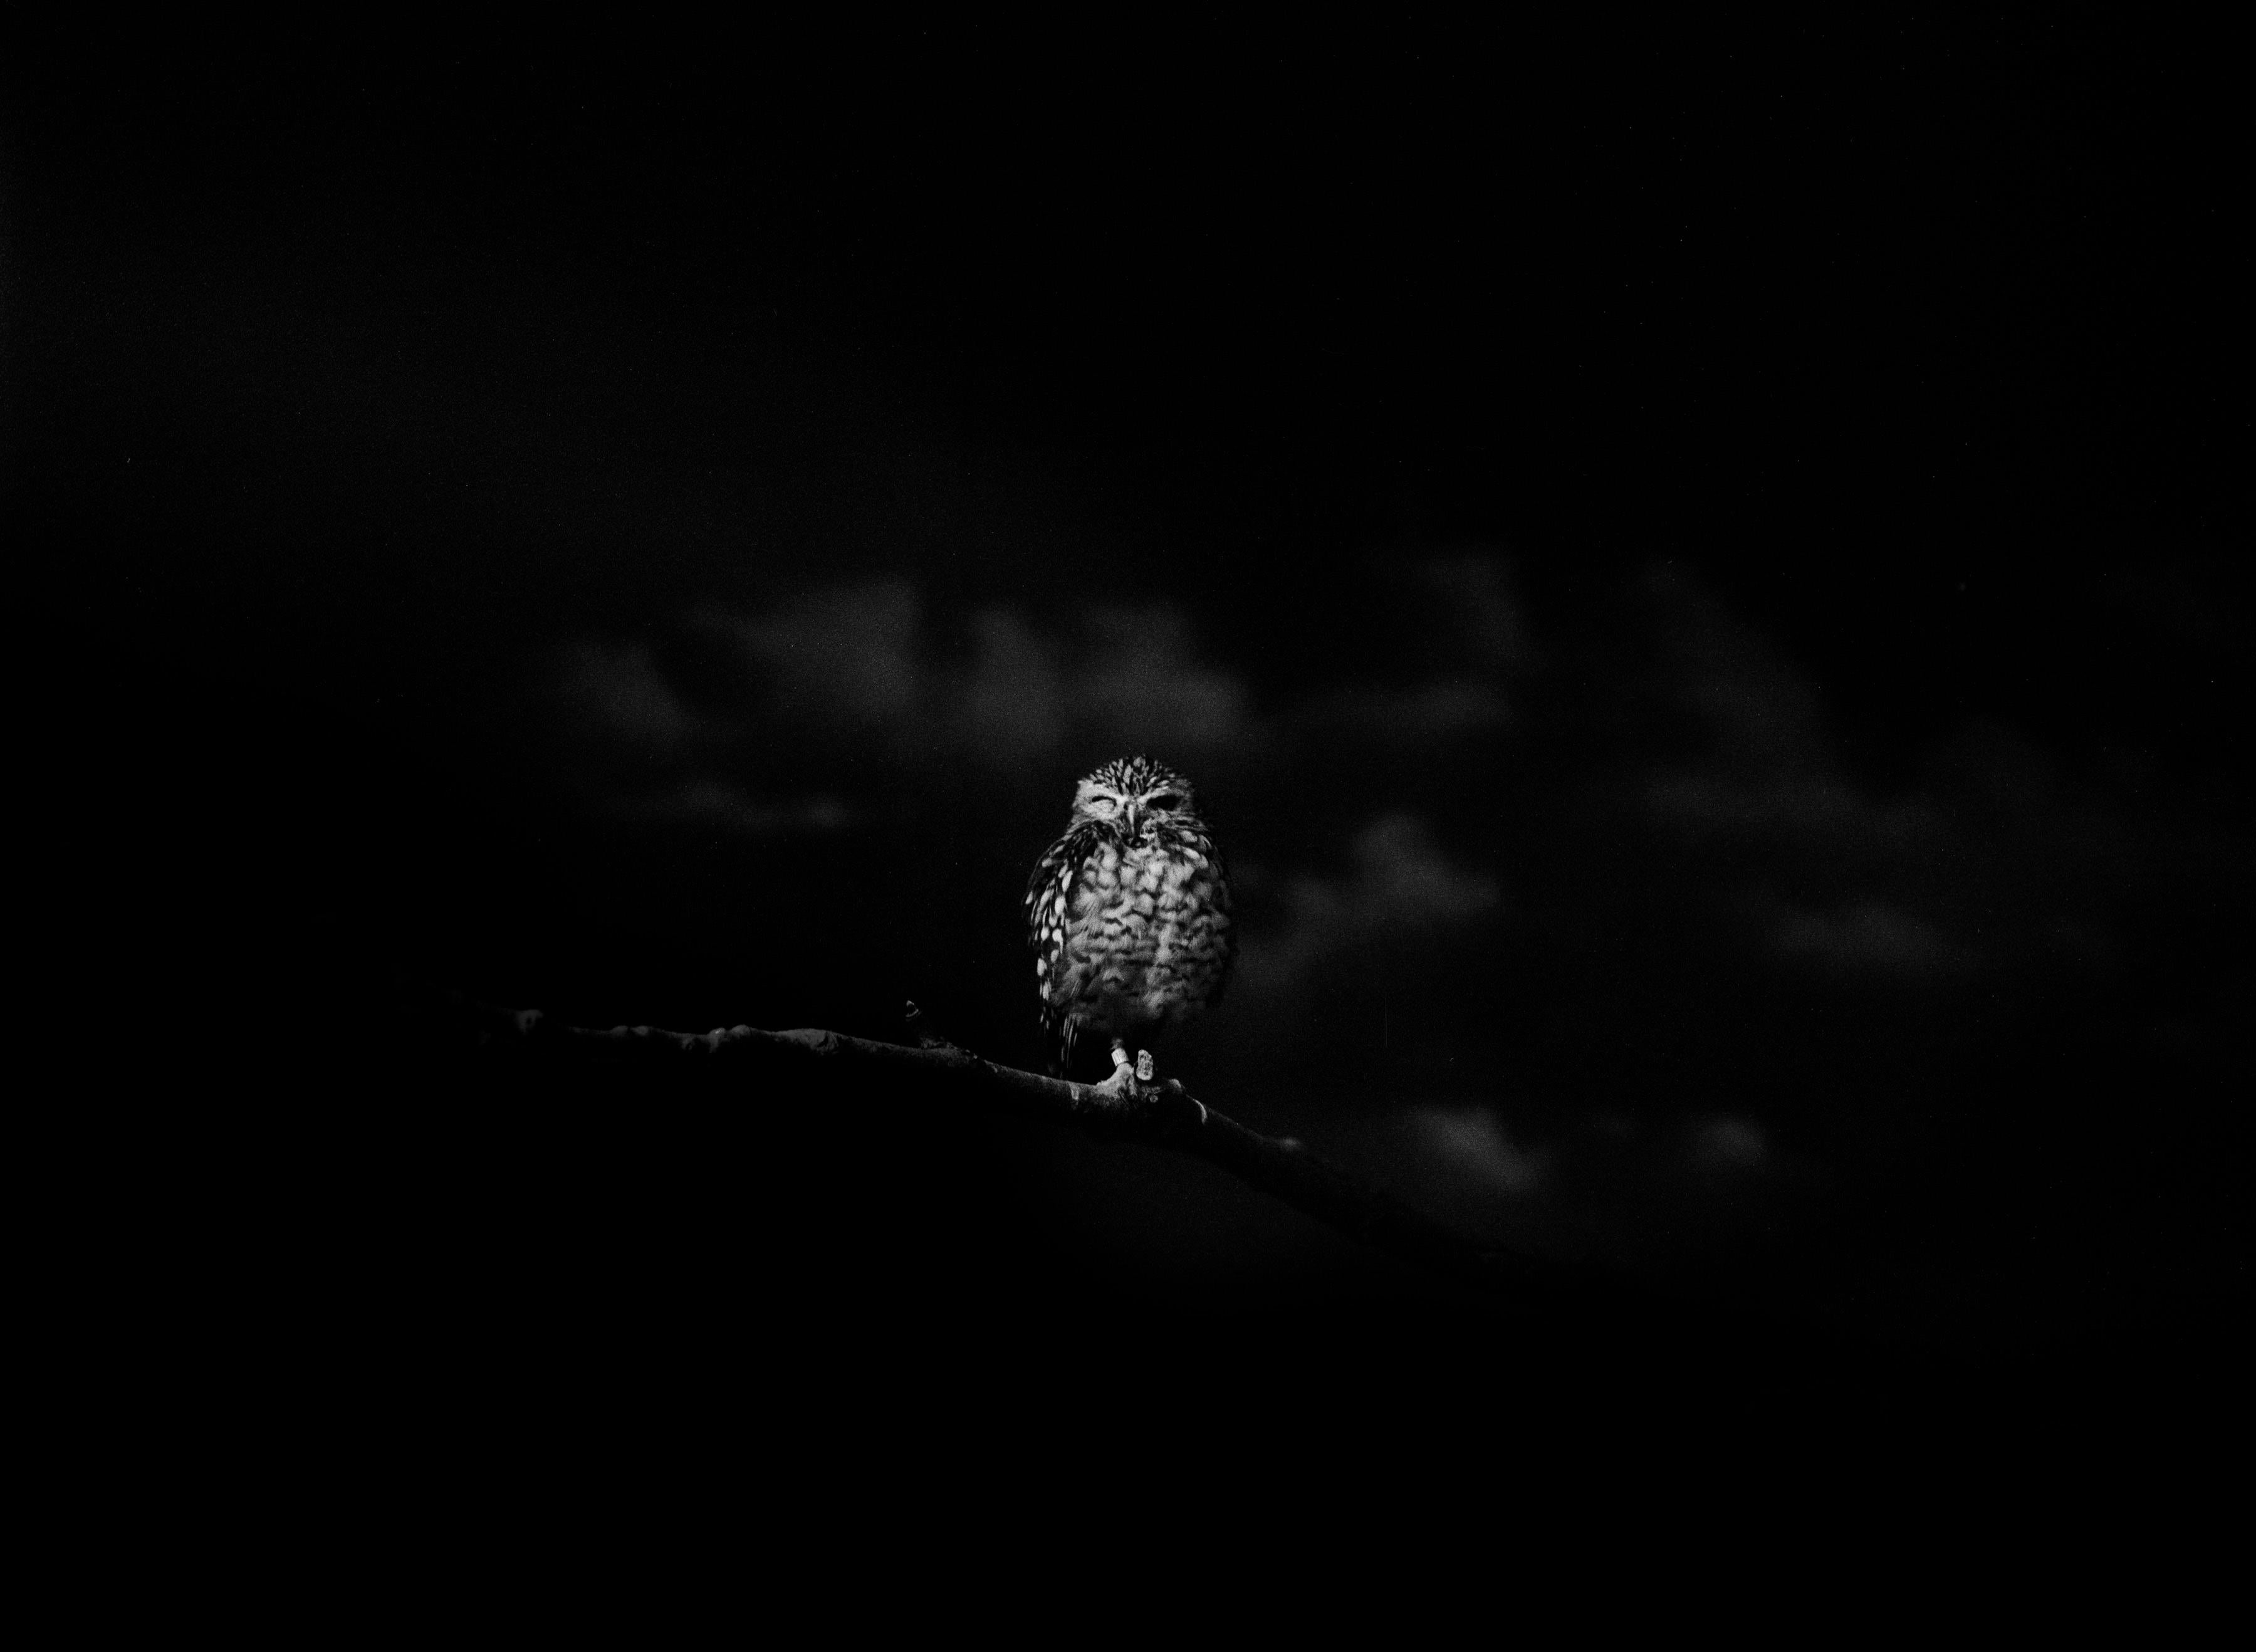 Nocturnal Animal, Contemporary black and white photo of owl, bird of prey